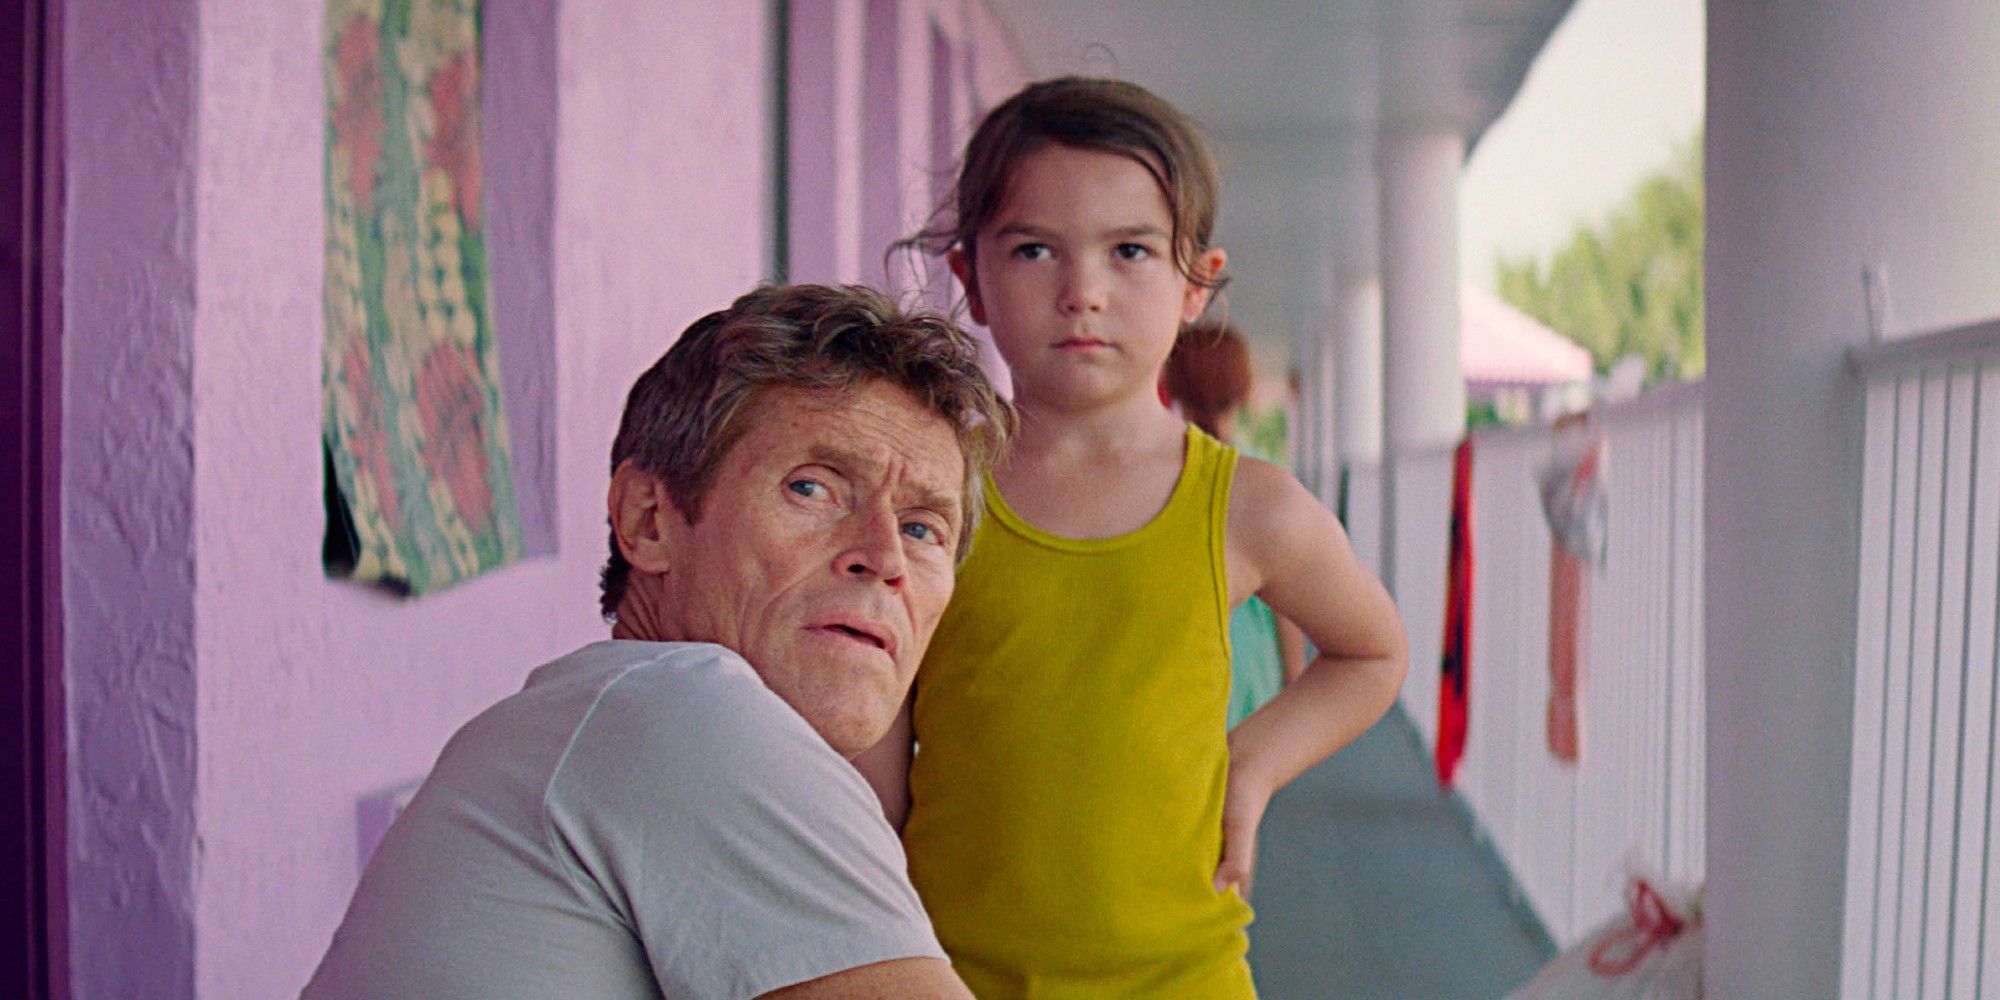 Bobby and Moonee looking in the same direction in The Florida Project